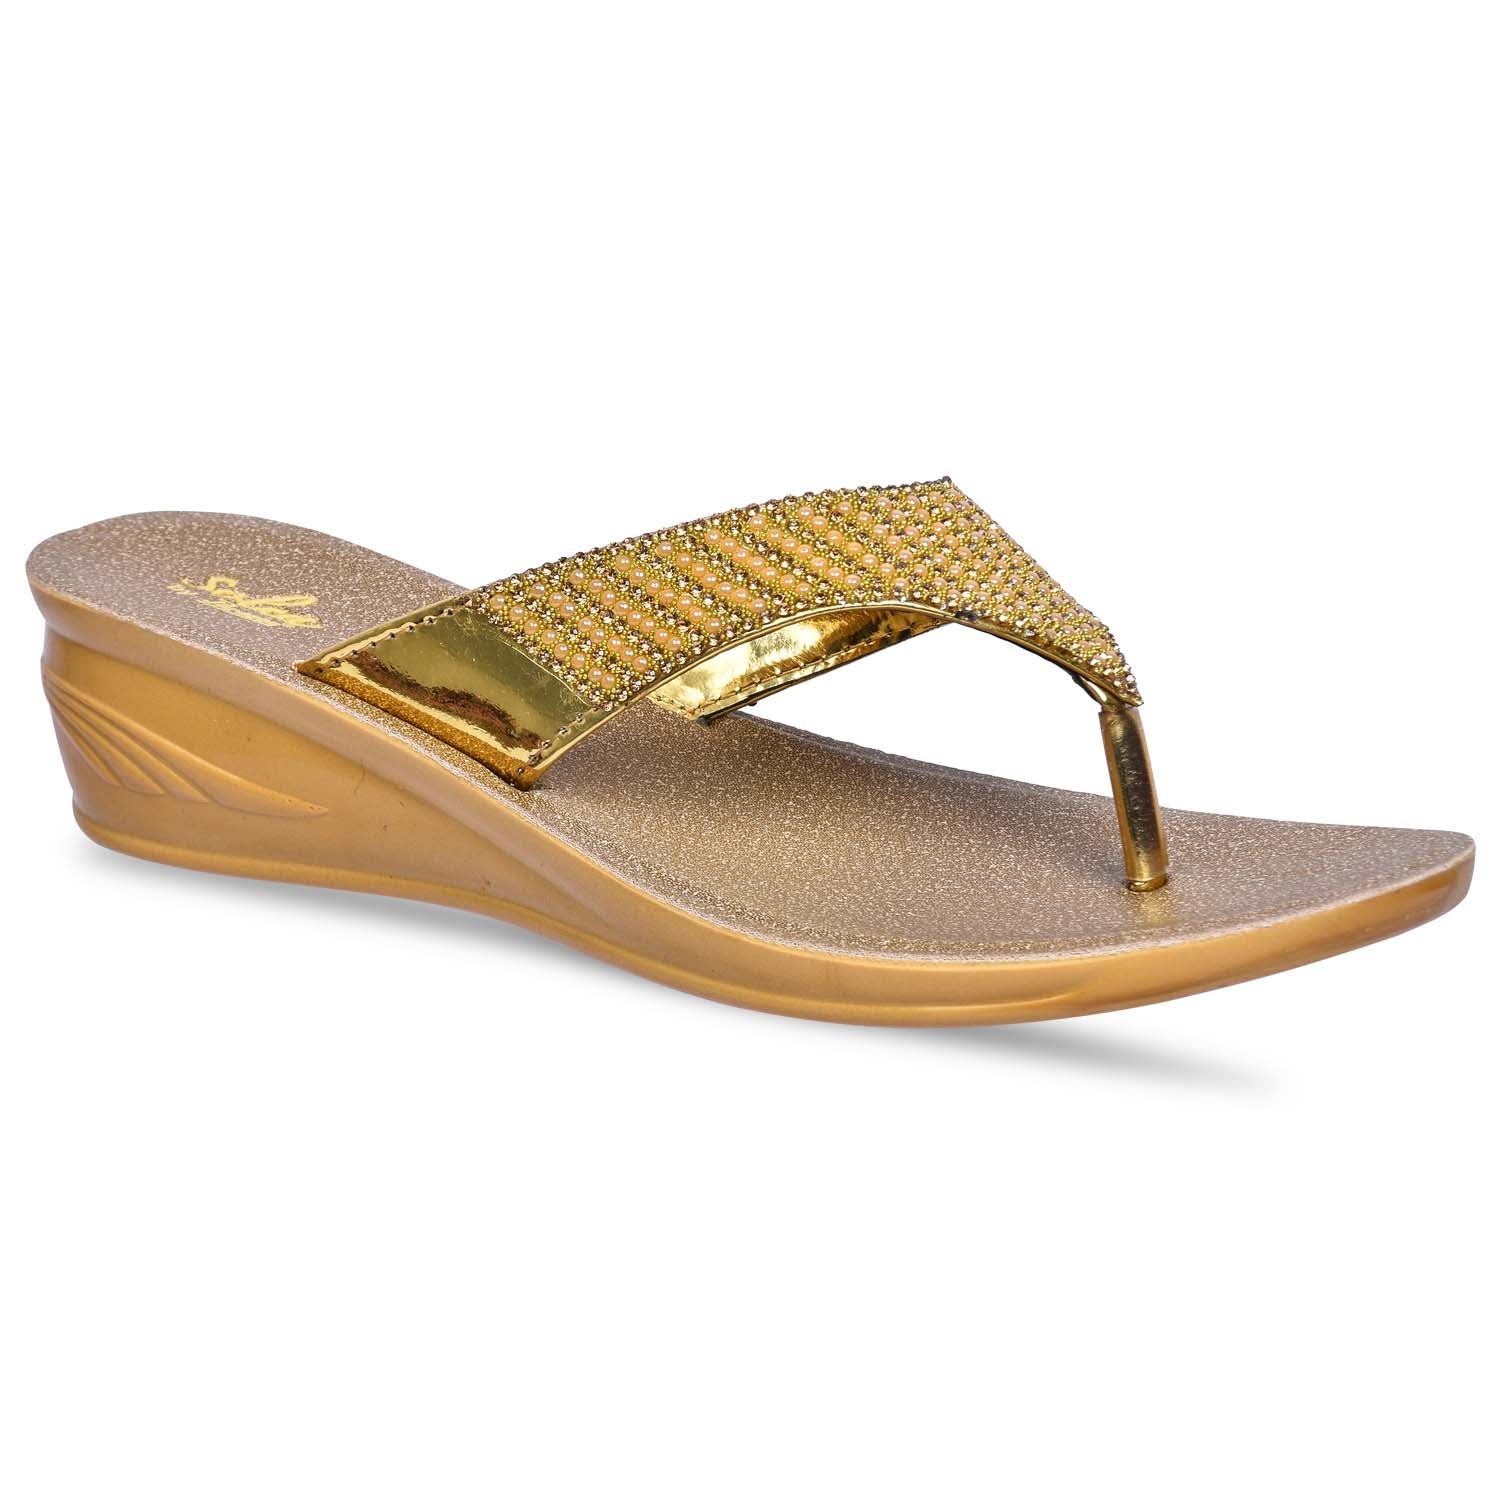 Paragon R90250L Women Sandals | Casual &amp; Formal Sandals | Stylish, Comfortable &amp; Durable | For Daily &amp; Occasion Wear